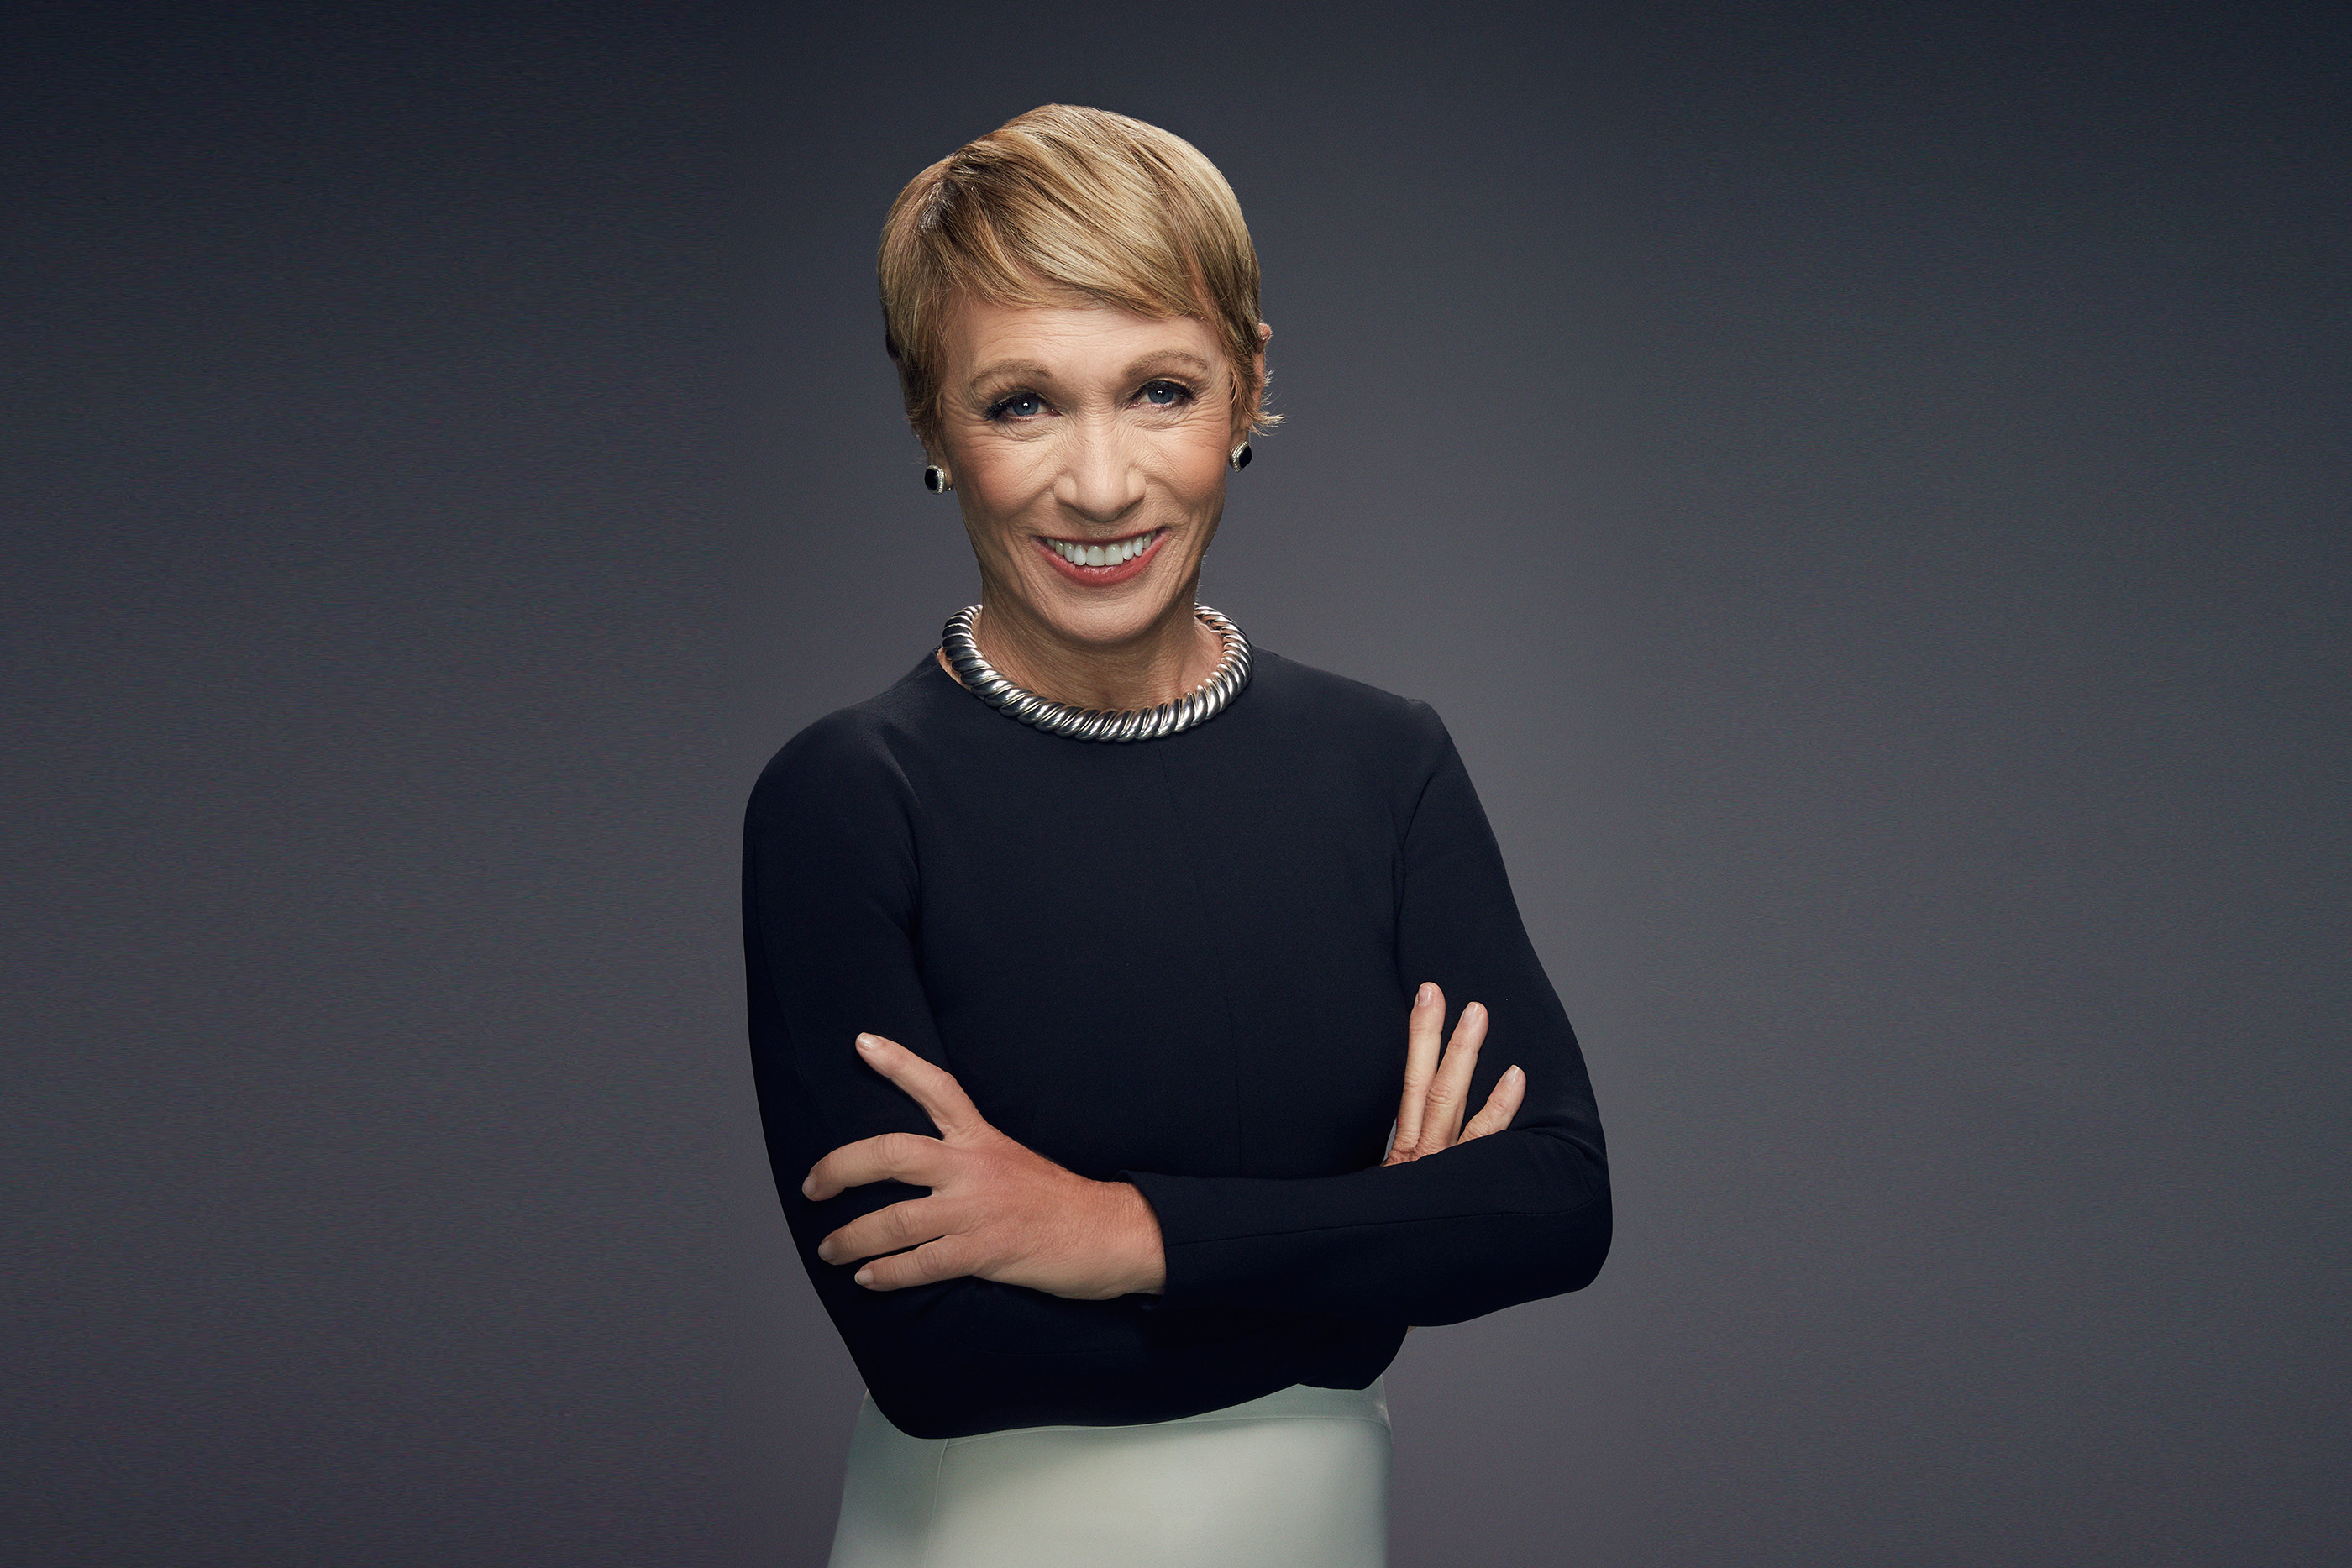 What is the net worth of Barbara Corcoran?